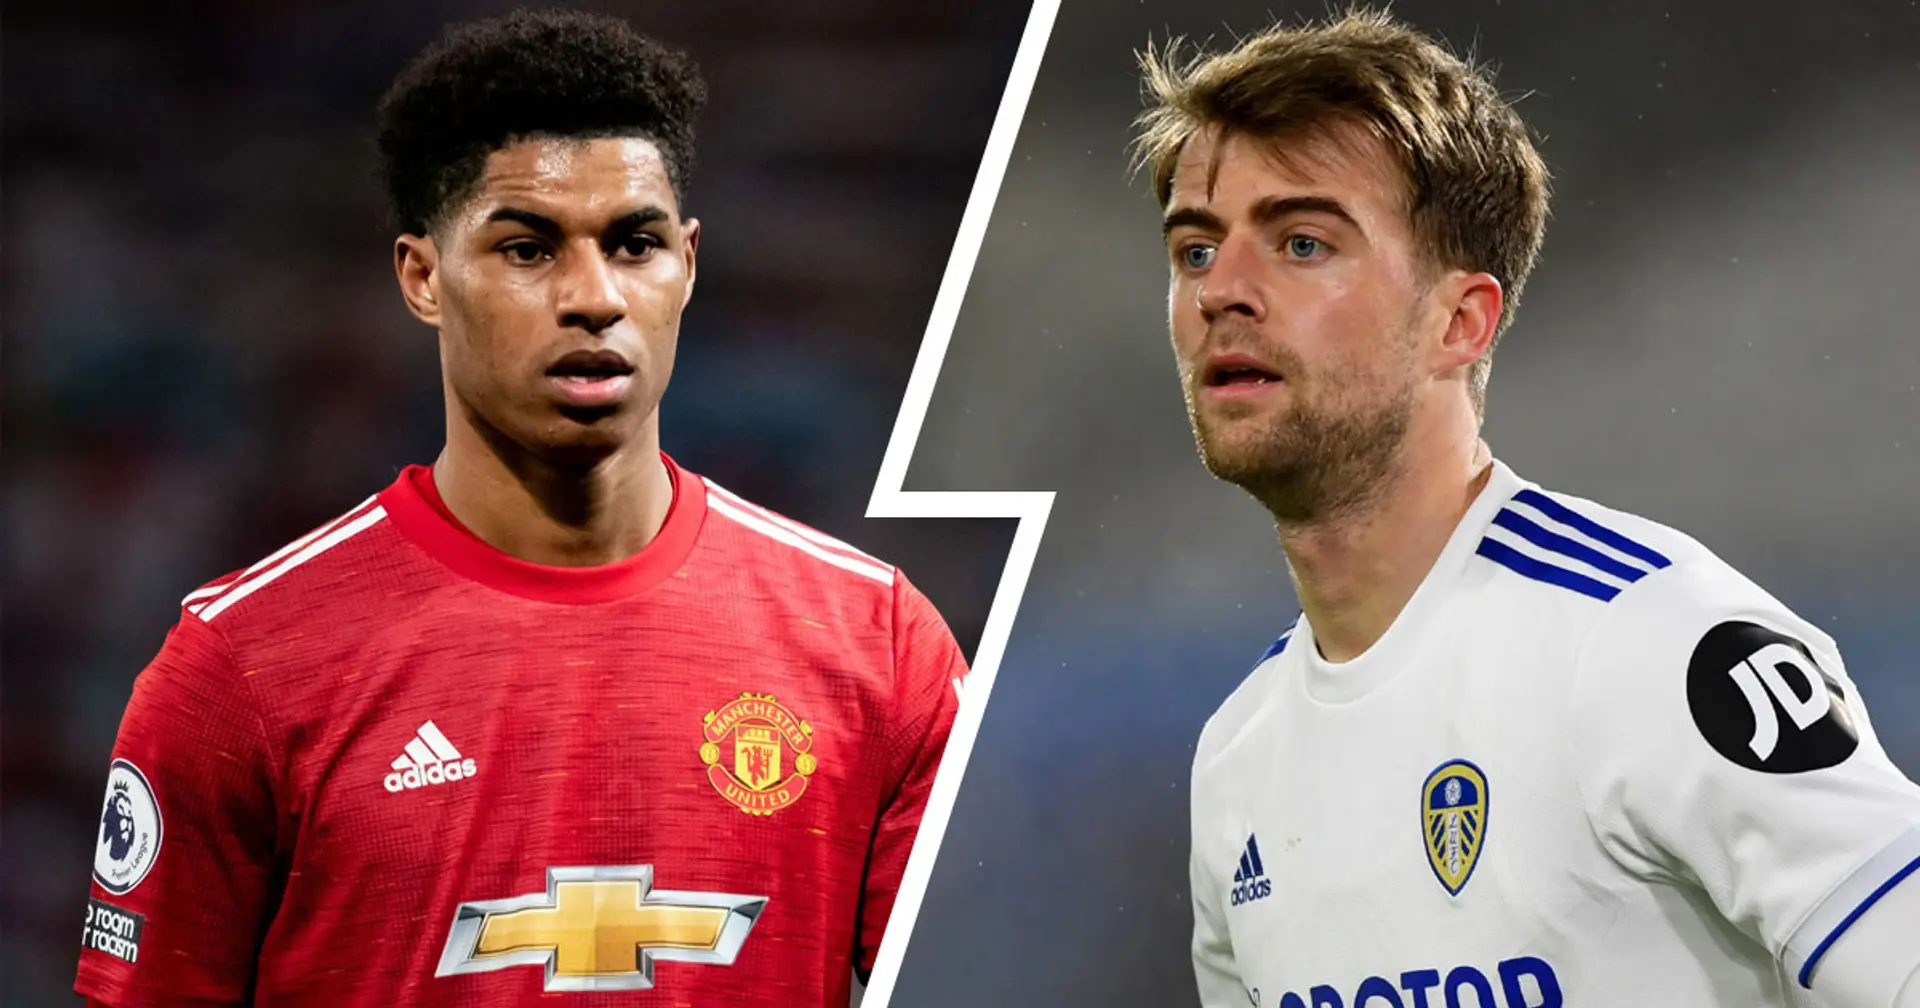 'He's set the ball rolling for us': Patrick Bamford reveals how Rashford's charity efforts inspired his activism